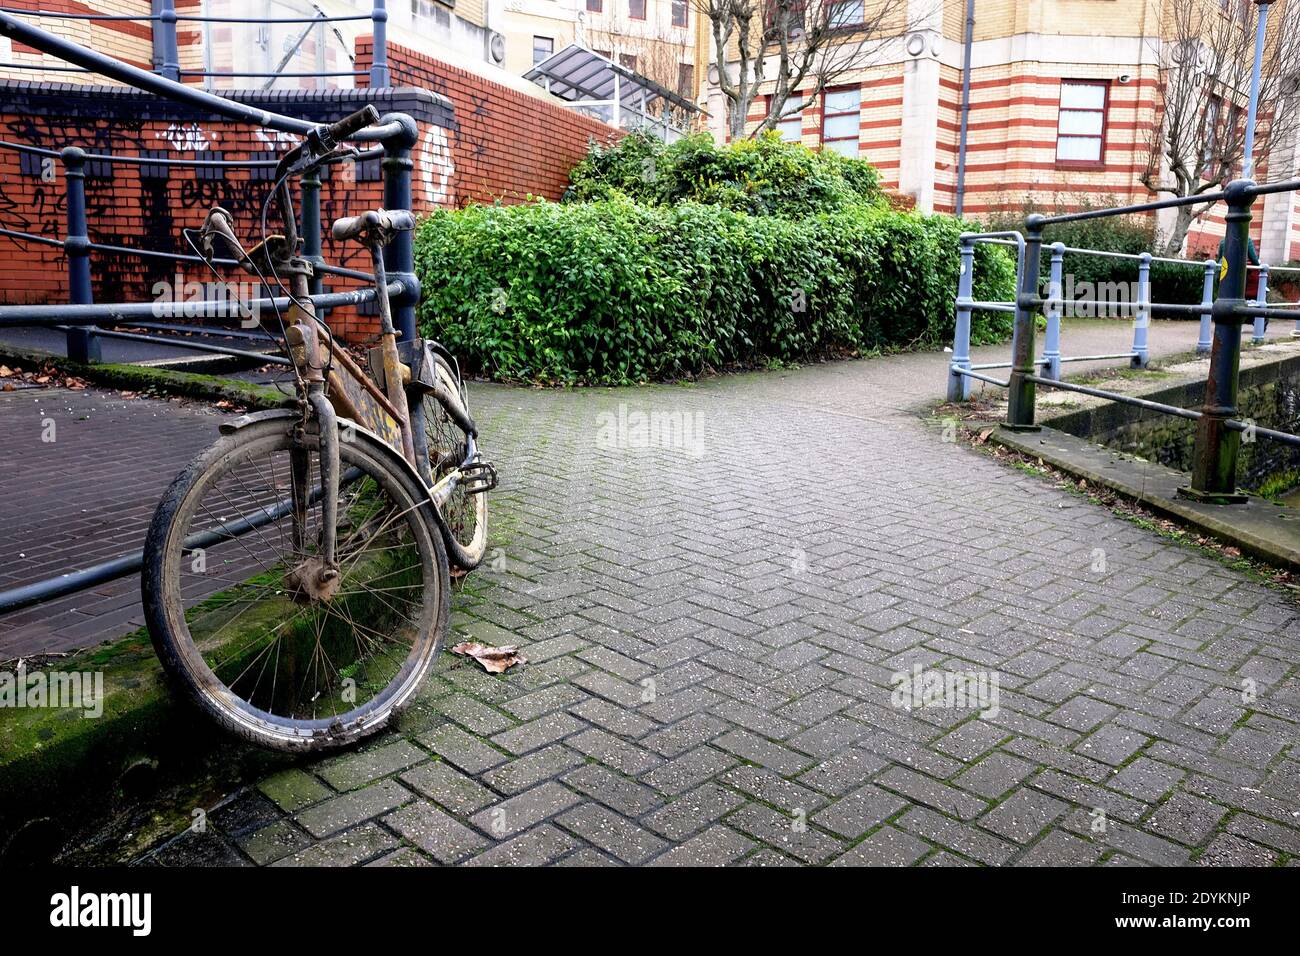 December 2020 - An old bike rescued from the river in Central Bristol Stock Photo